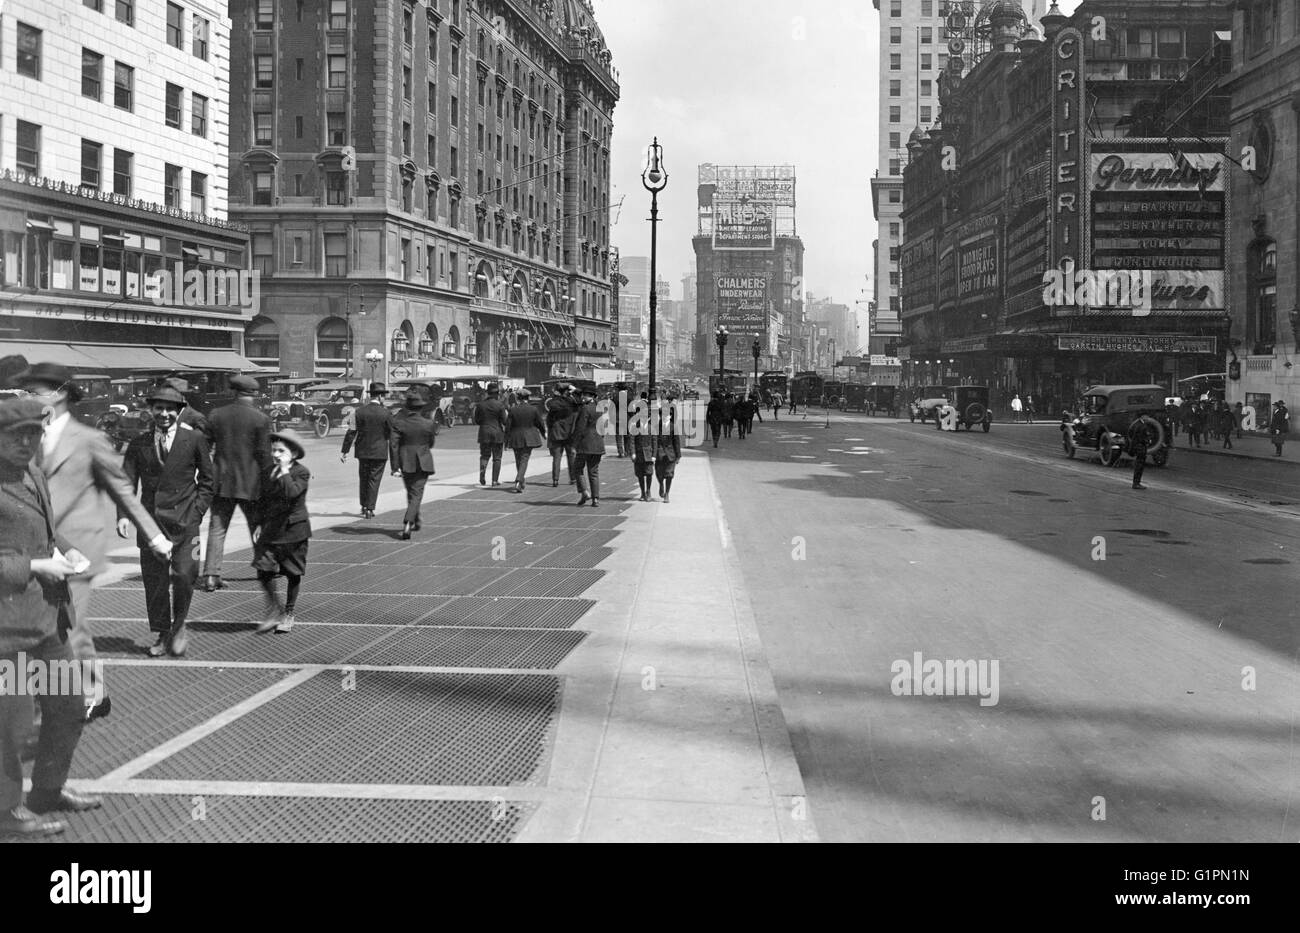 NEW YORK: TIMES SQUARE.  44th Street and Broadway in Times Square in New York City; the Olympia Theatre complex is on the right, including Loew's Theatre and the Criterion movie theatre. Photograph, 1921. Stock Photo